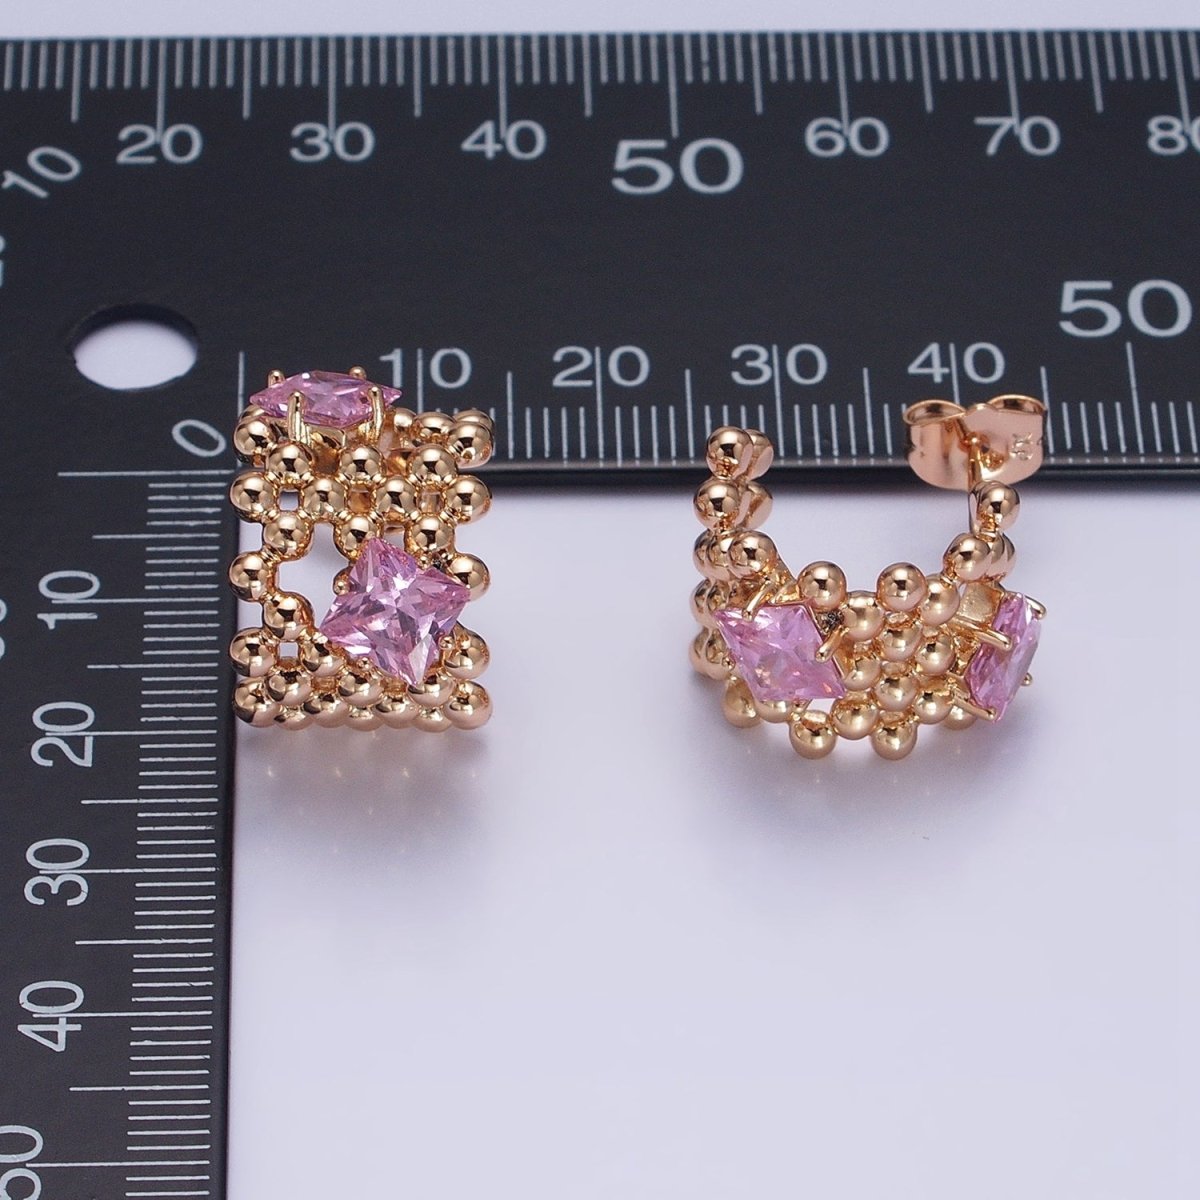 18K Gold Filled Purple, Clear, Green, Pink Square CZ Round Beaded Bubble C-Shaped Hoop Earrings | AD1401 - AD1404 - DLUXCA